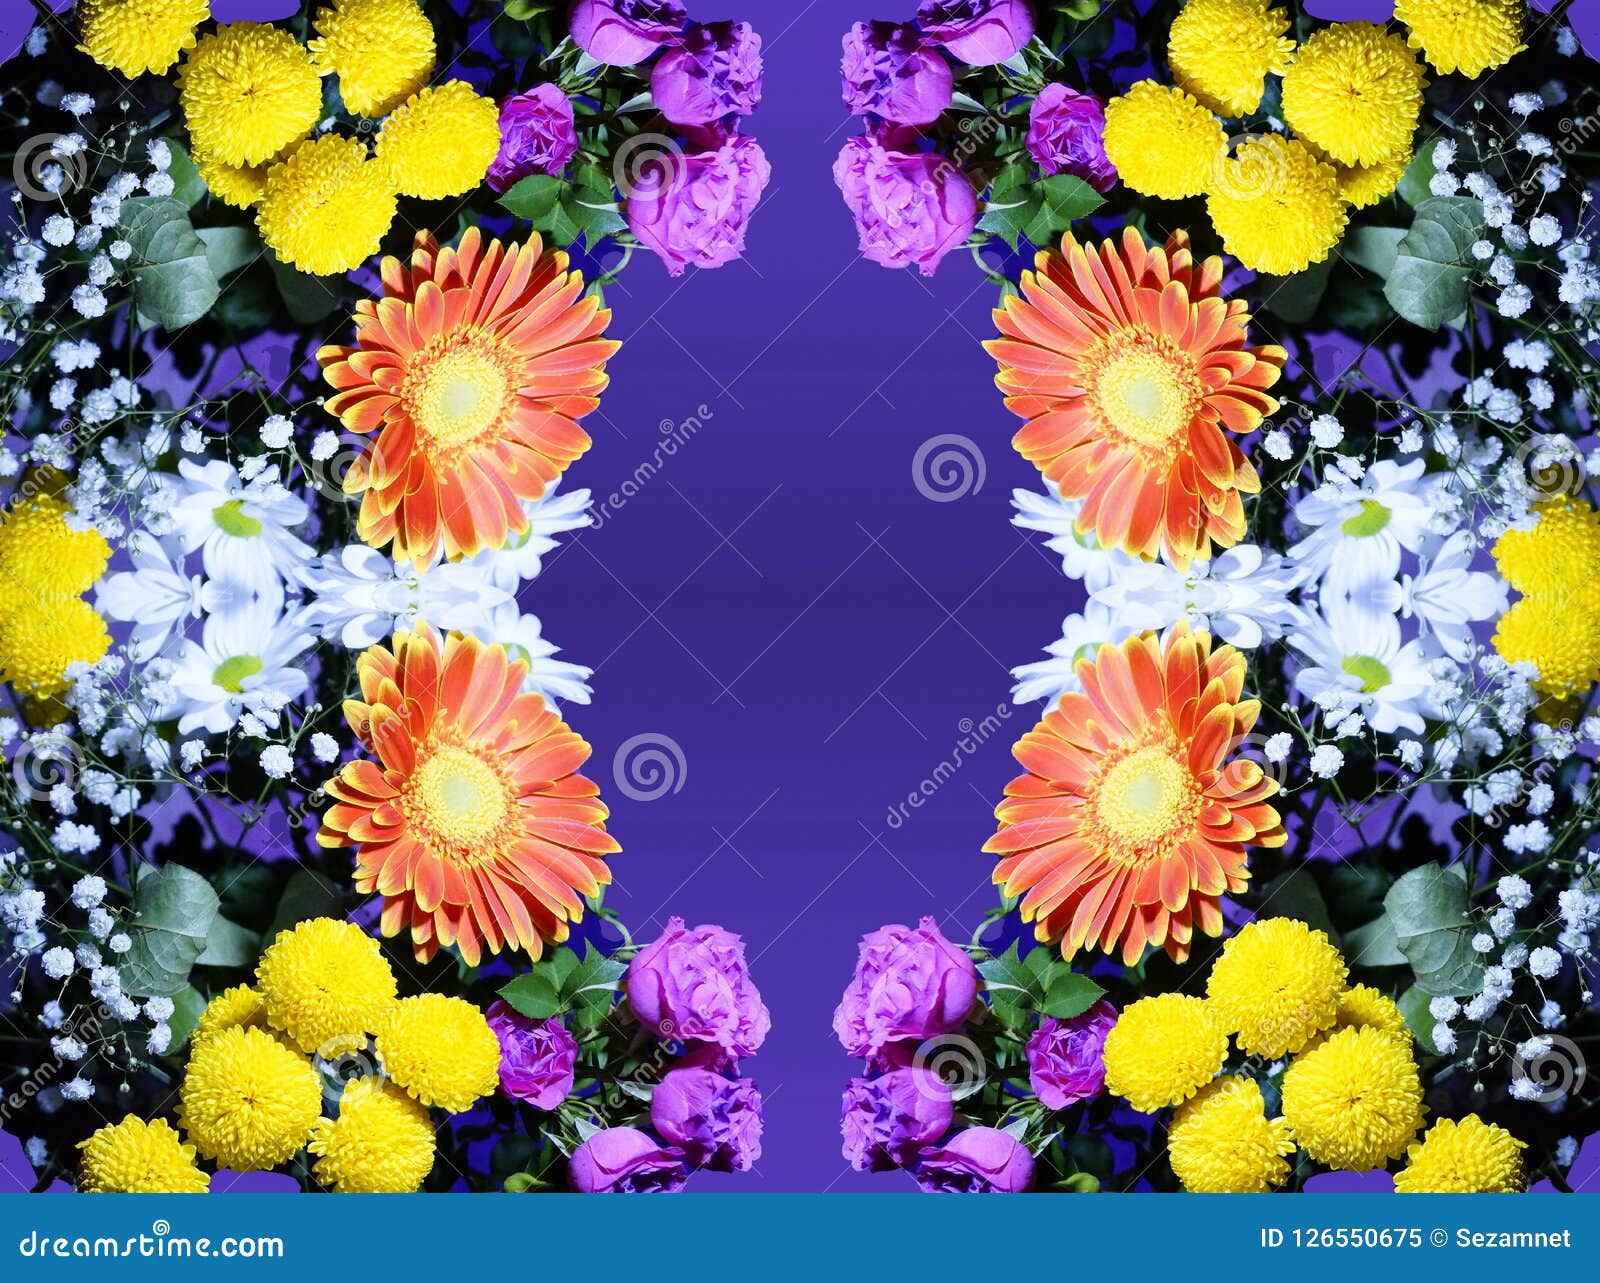 Flower Arrangement Of Orange White Pink Yellow Flowers Stock Image Image Of Gift Bouquet 126550675